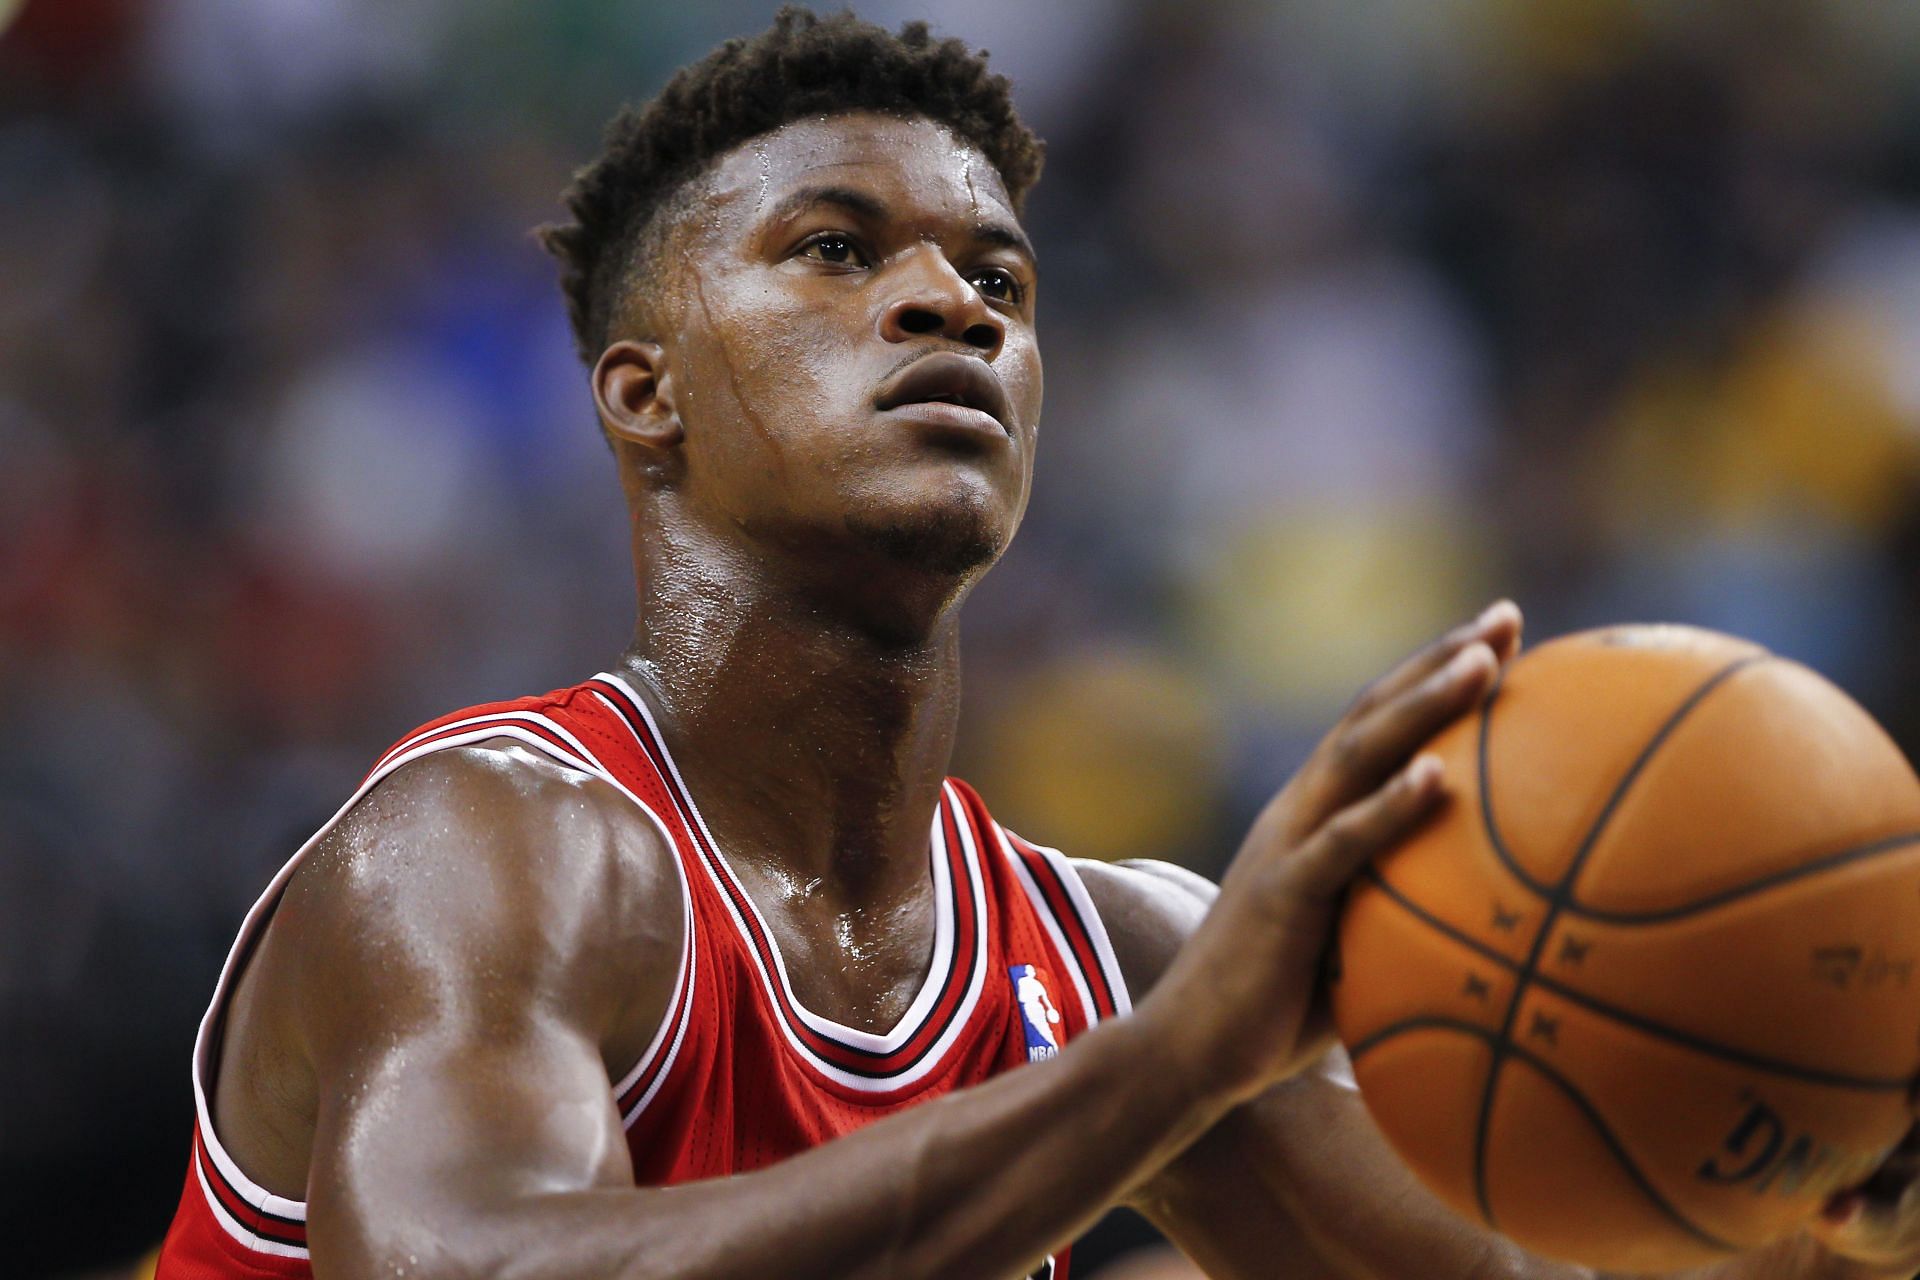 What college did Jimmy Butler go to? Looking at Heat's superstar